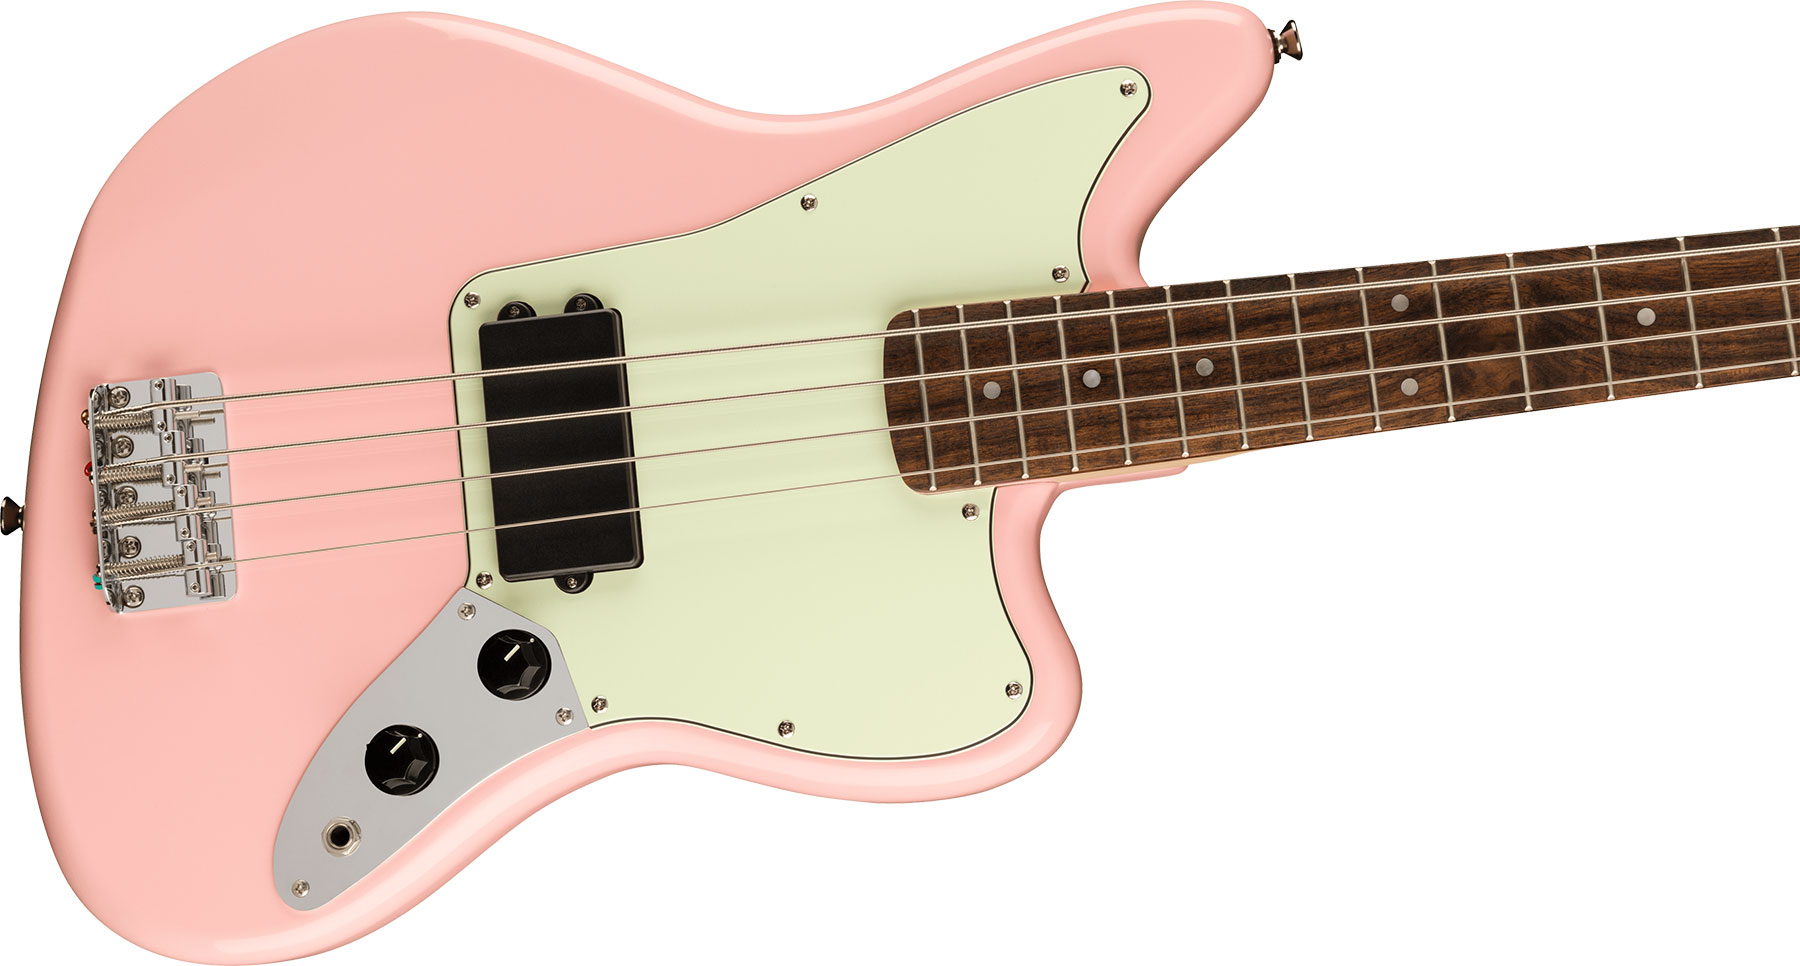 Squier Jaguar Bass H Affinity Fsr Lau - Shell Pink - Solid body electric bass - Variation 2